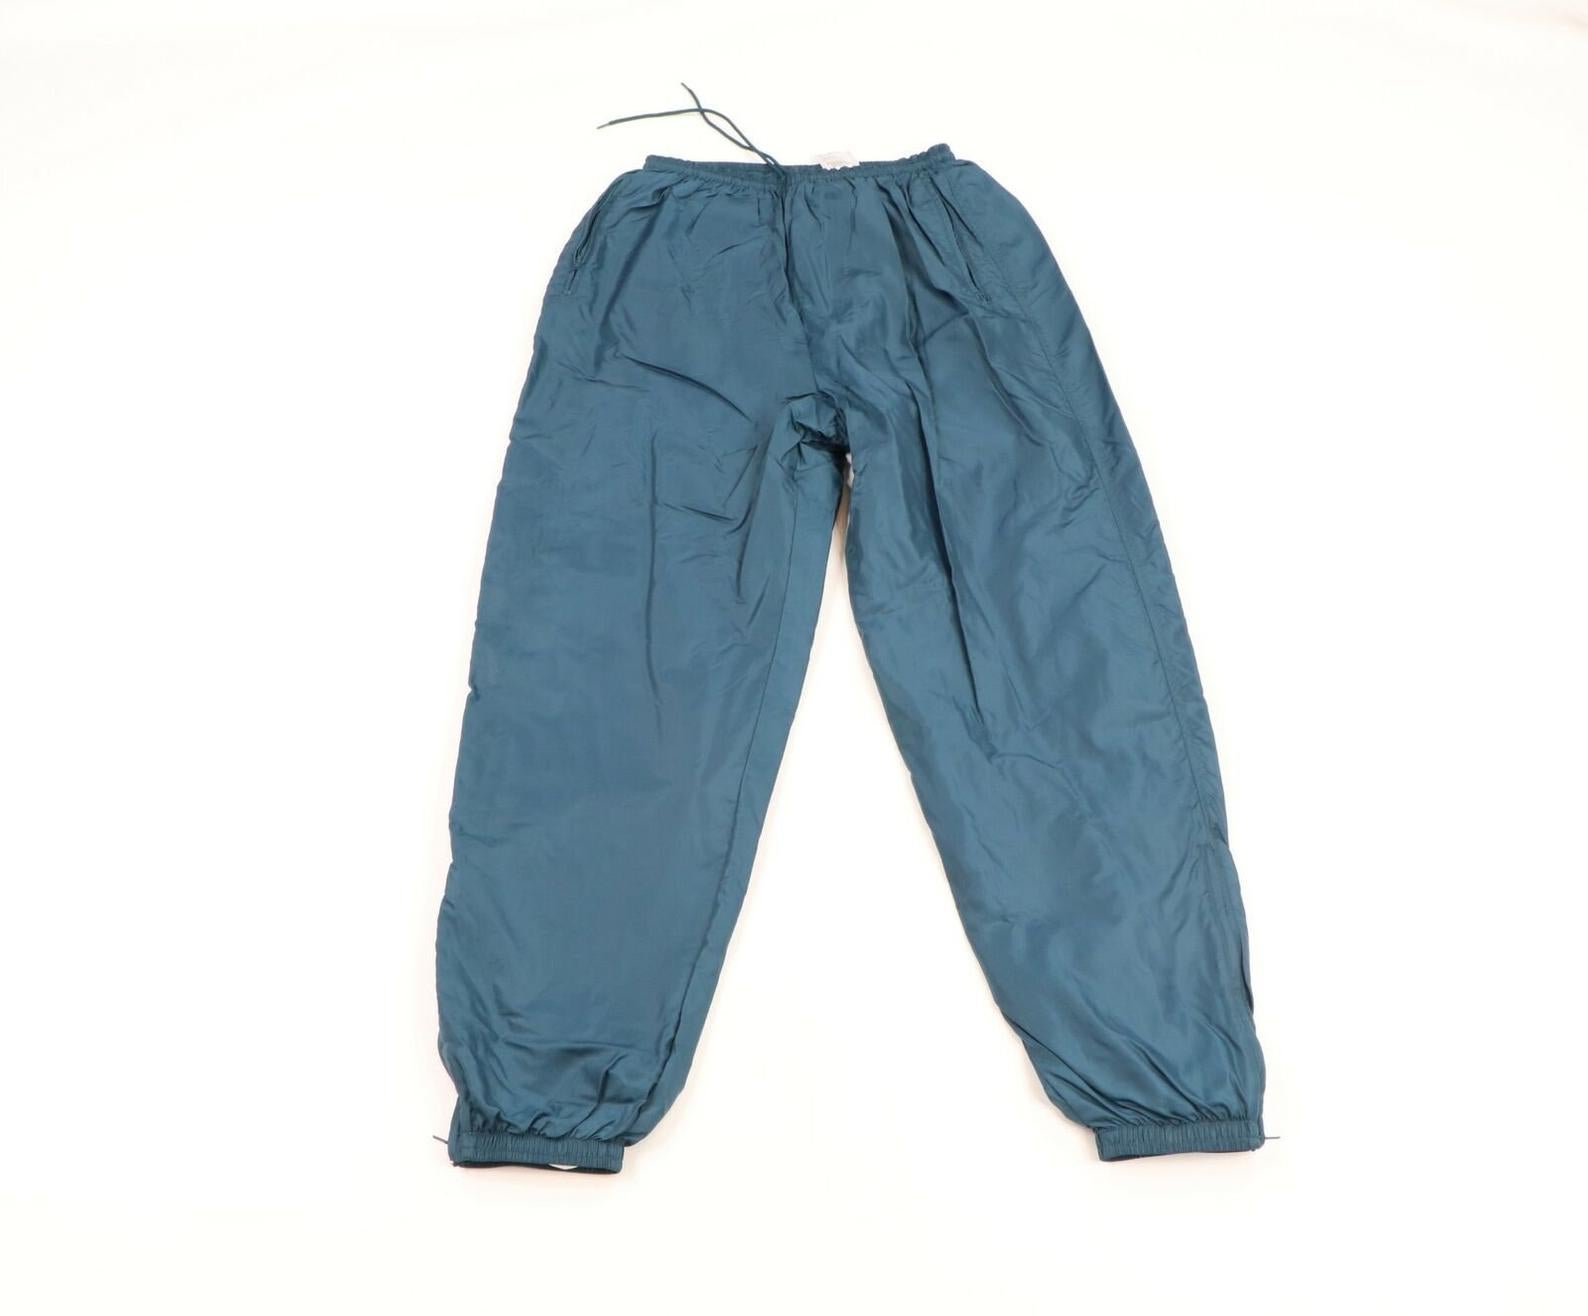 Parachute Pants Are The Summer Equivalent Of Sweatpants